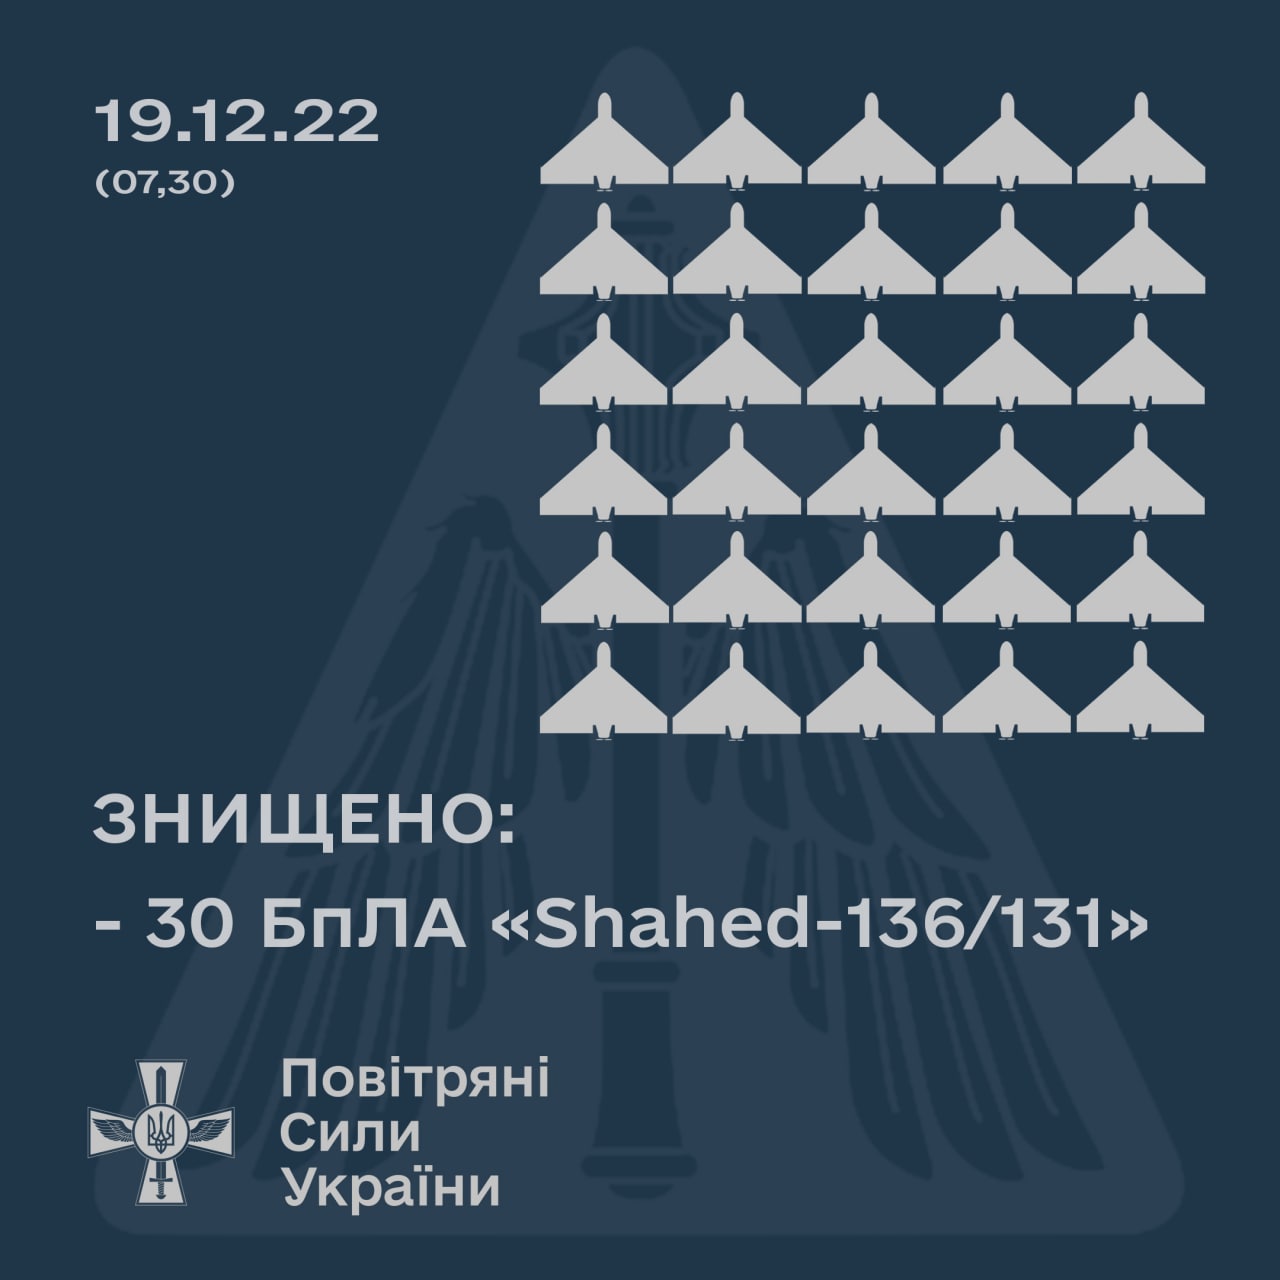 30/35 Shahed down / Ukrainian Air Force Command